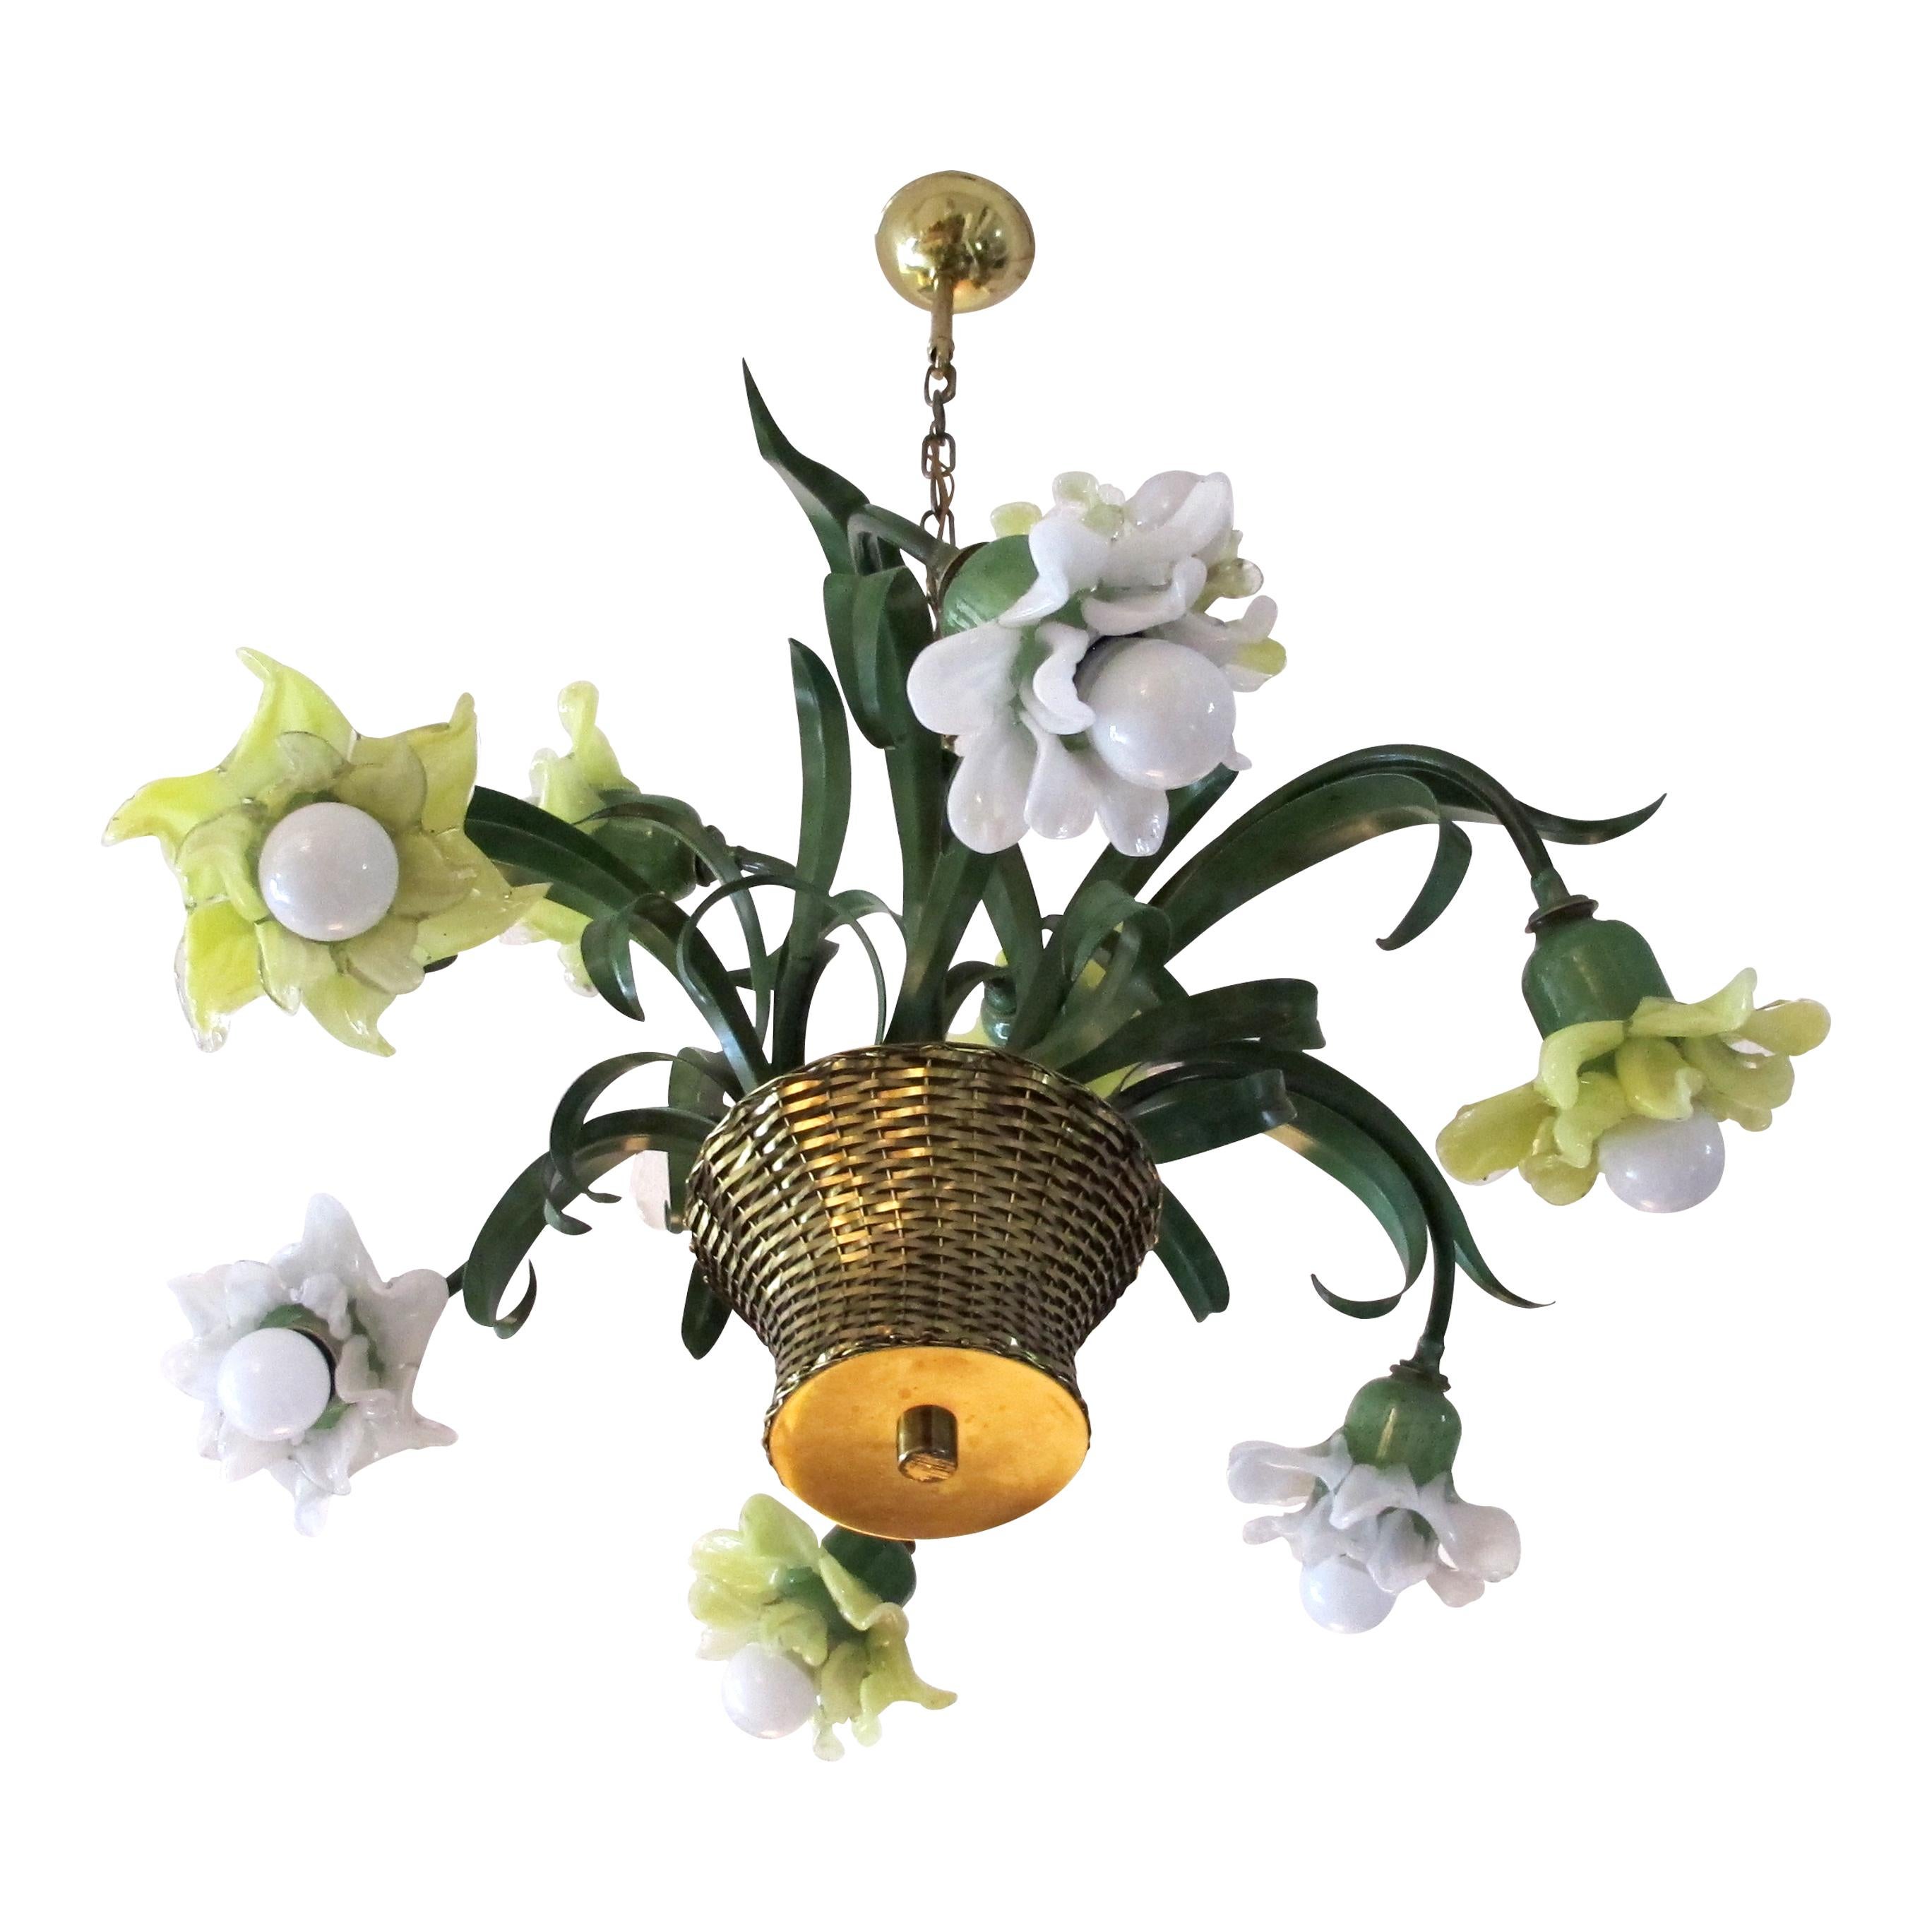 1980s elegant chandelier made by the renowned designer Banci from Florence, Italy. The flowers are handmade with Murano green, yellow and white glass. The chandelier imitates real flowers with metal leaves flowing out of a beautifully made brass